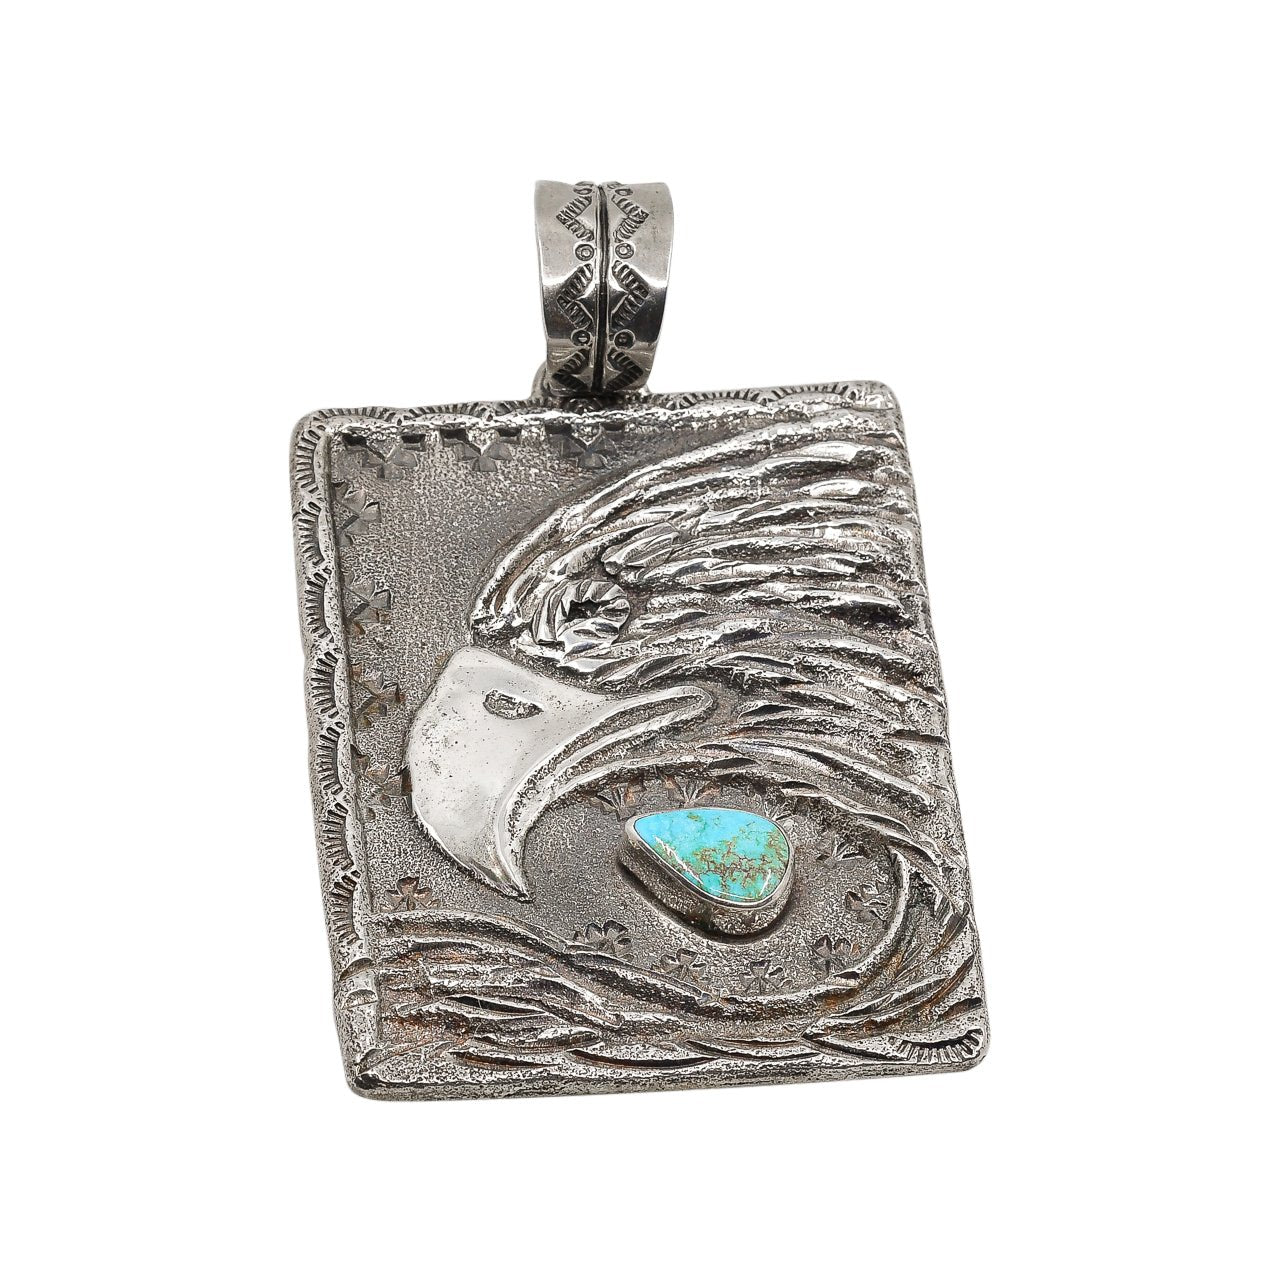 Original Handmade Fritz Casuse Pendant of Heavy Silver Eagle With Turquoise Accent - Turquoise & Tufa